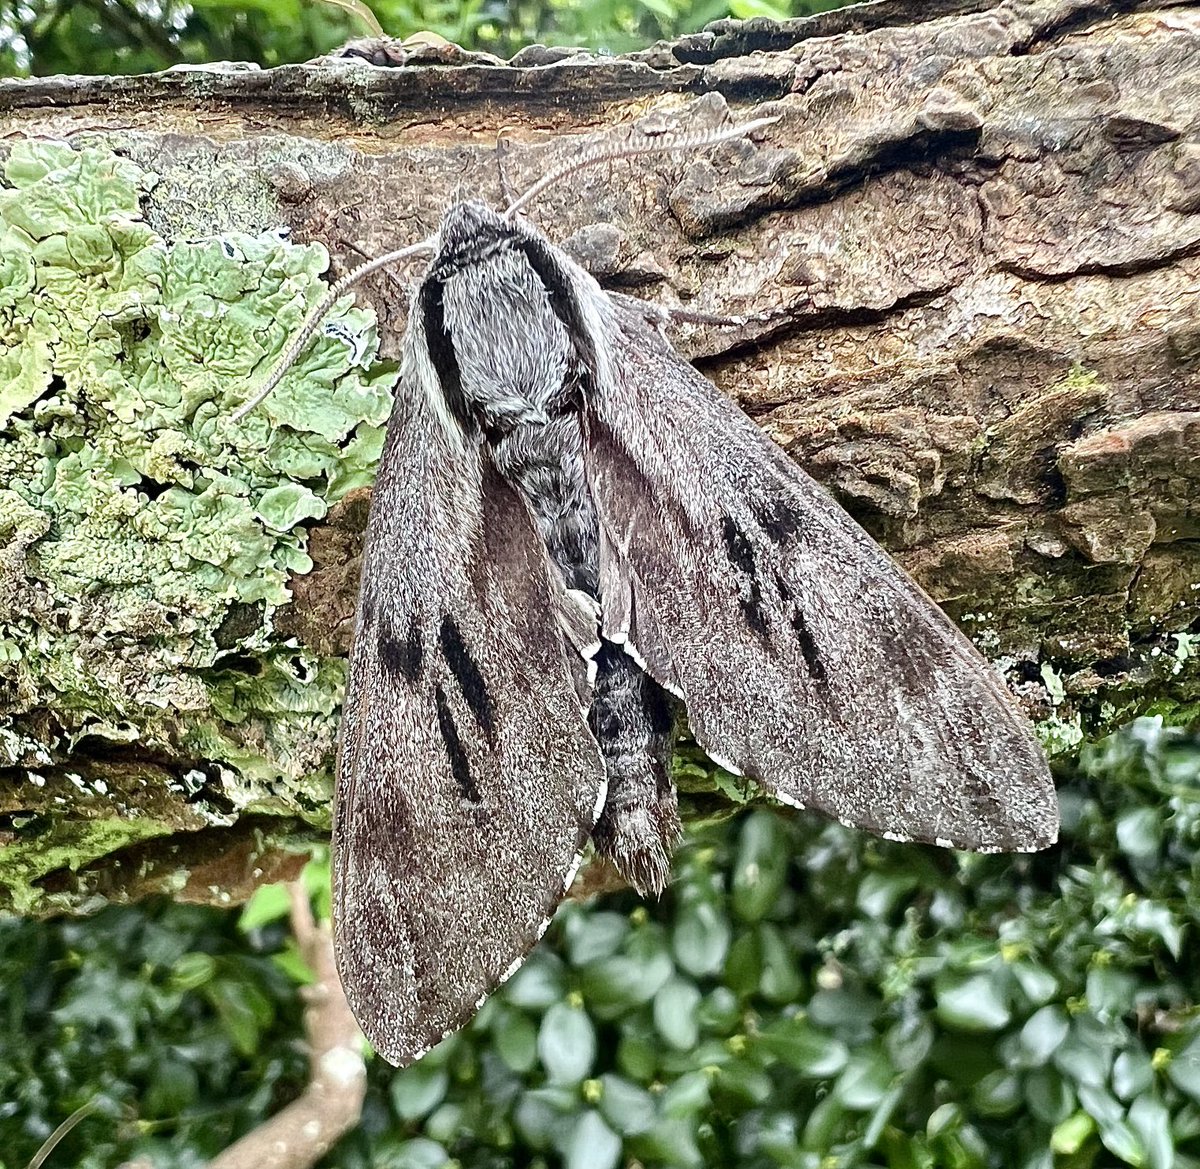 Much better #mothtrap last night in Corfe Castle. Ones of most. 22 of 20 sp. Delighted with this stunning Pine Hawkmoth. ⁦@BC_Dorset⁩ ⁦@DorsetMoths⁩